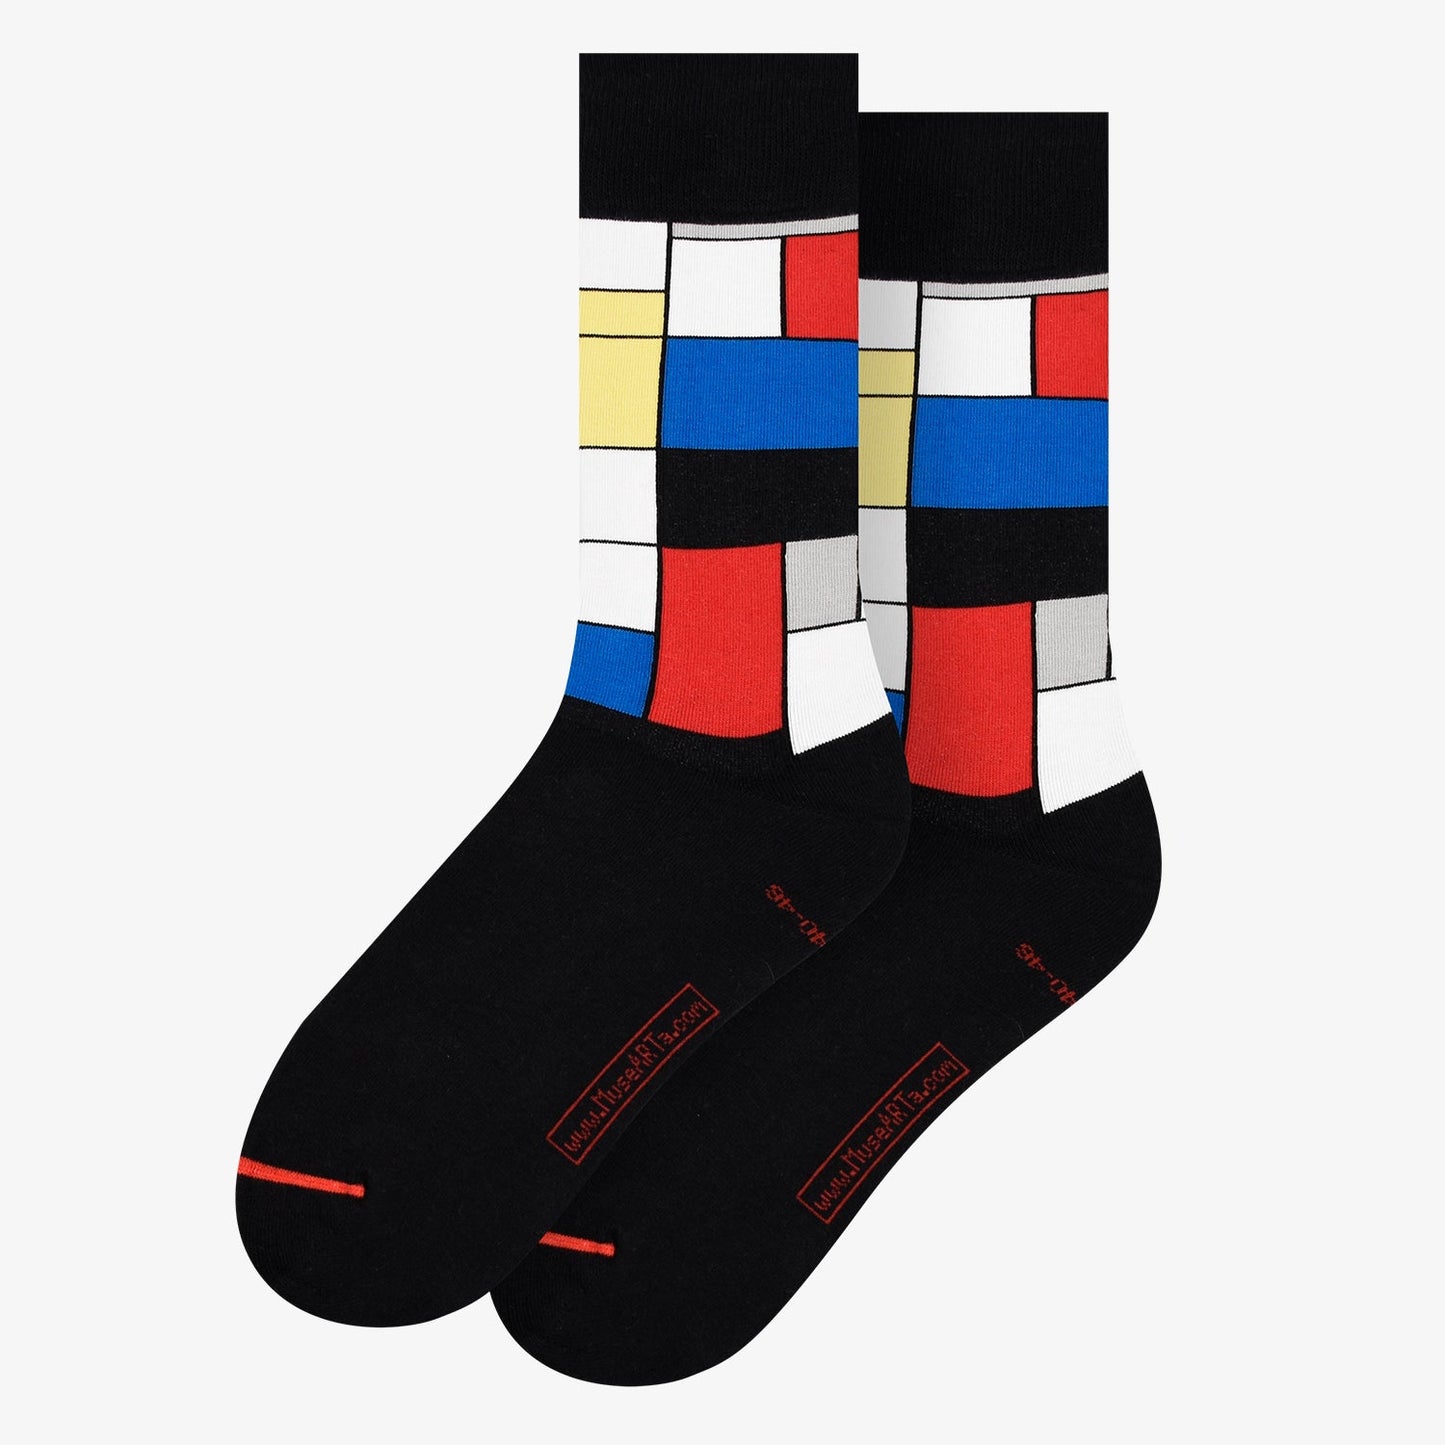 Piet Mondrian Composition with Red, Blue and Yellow Socks